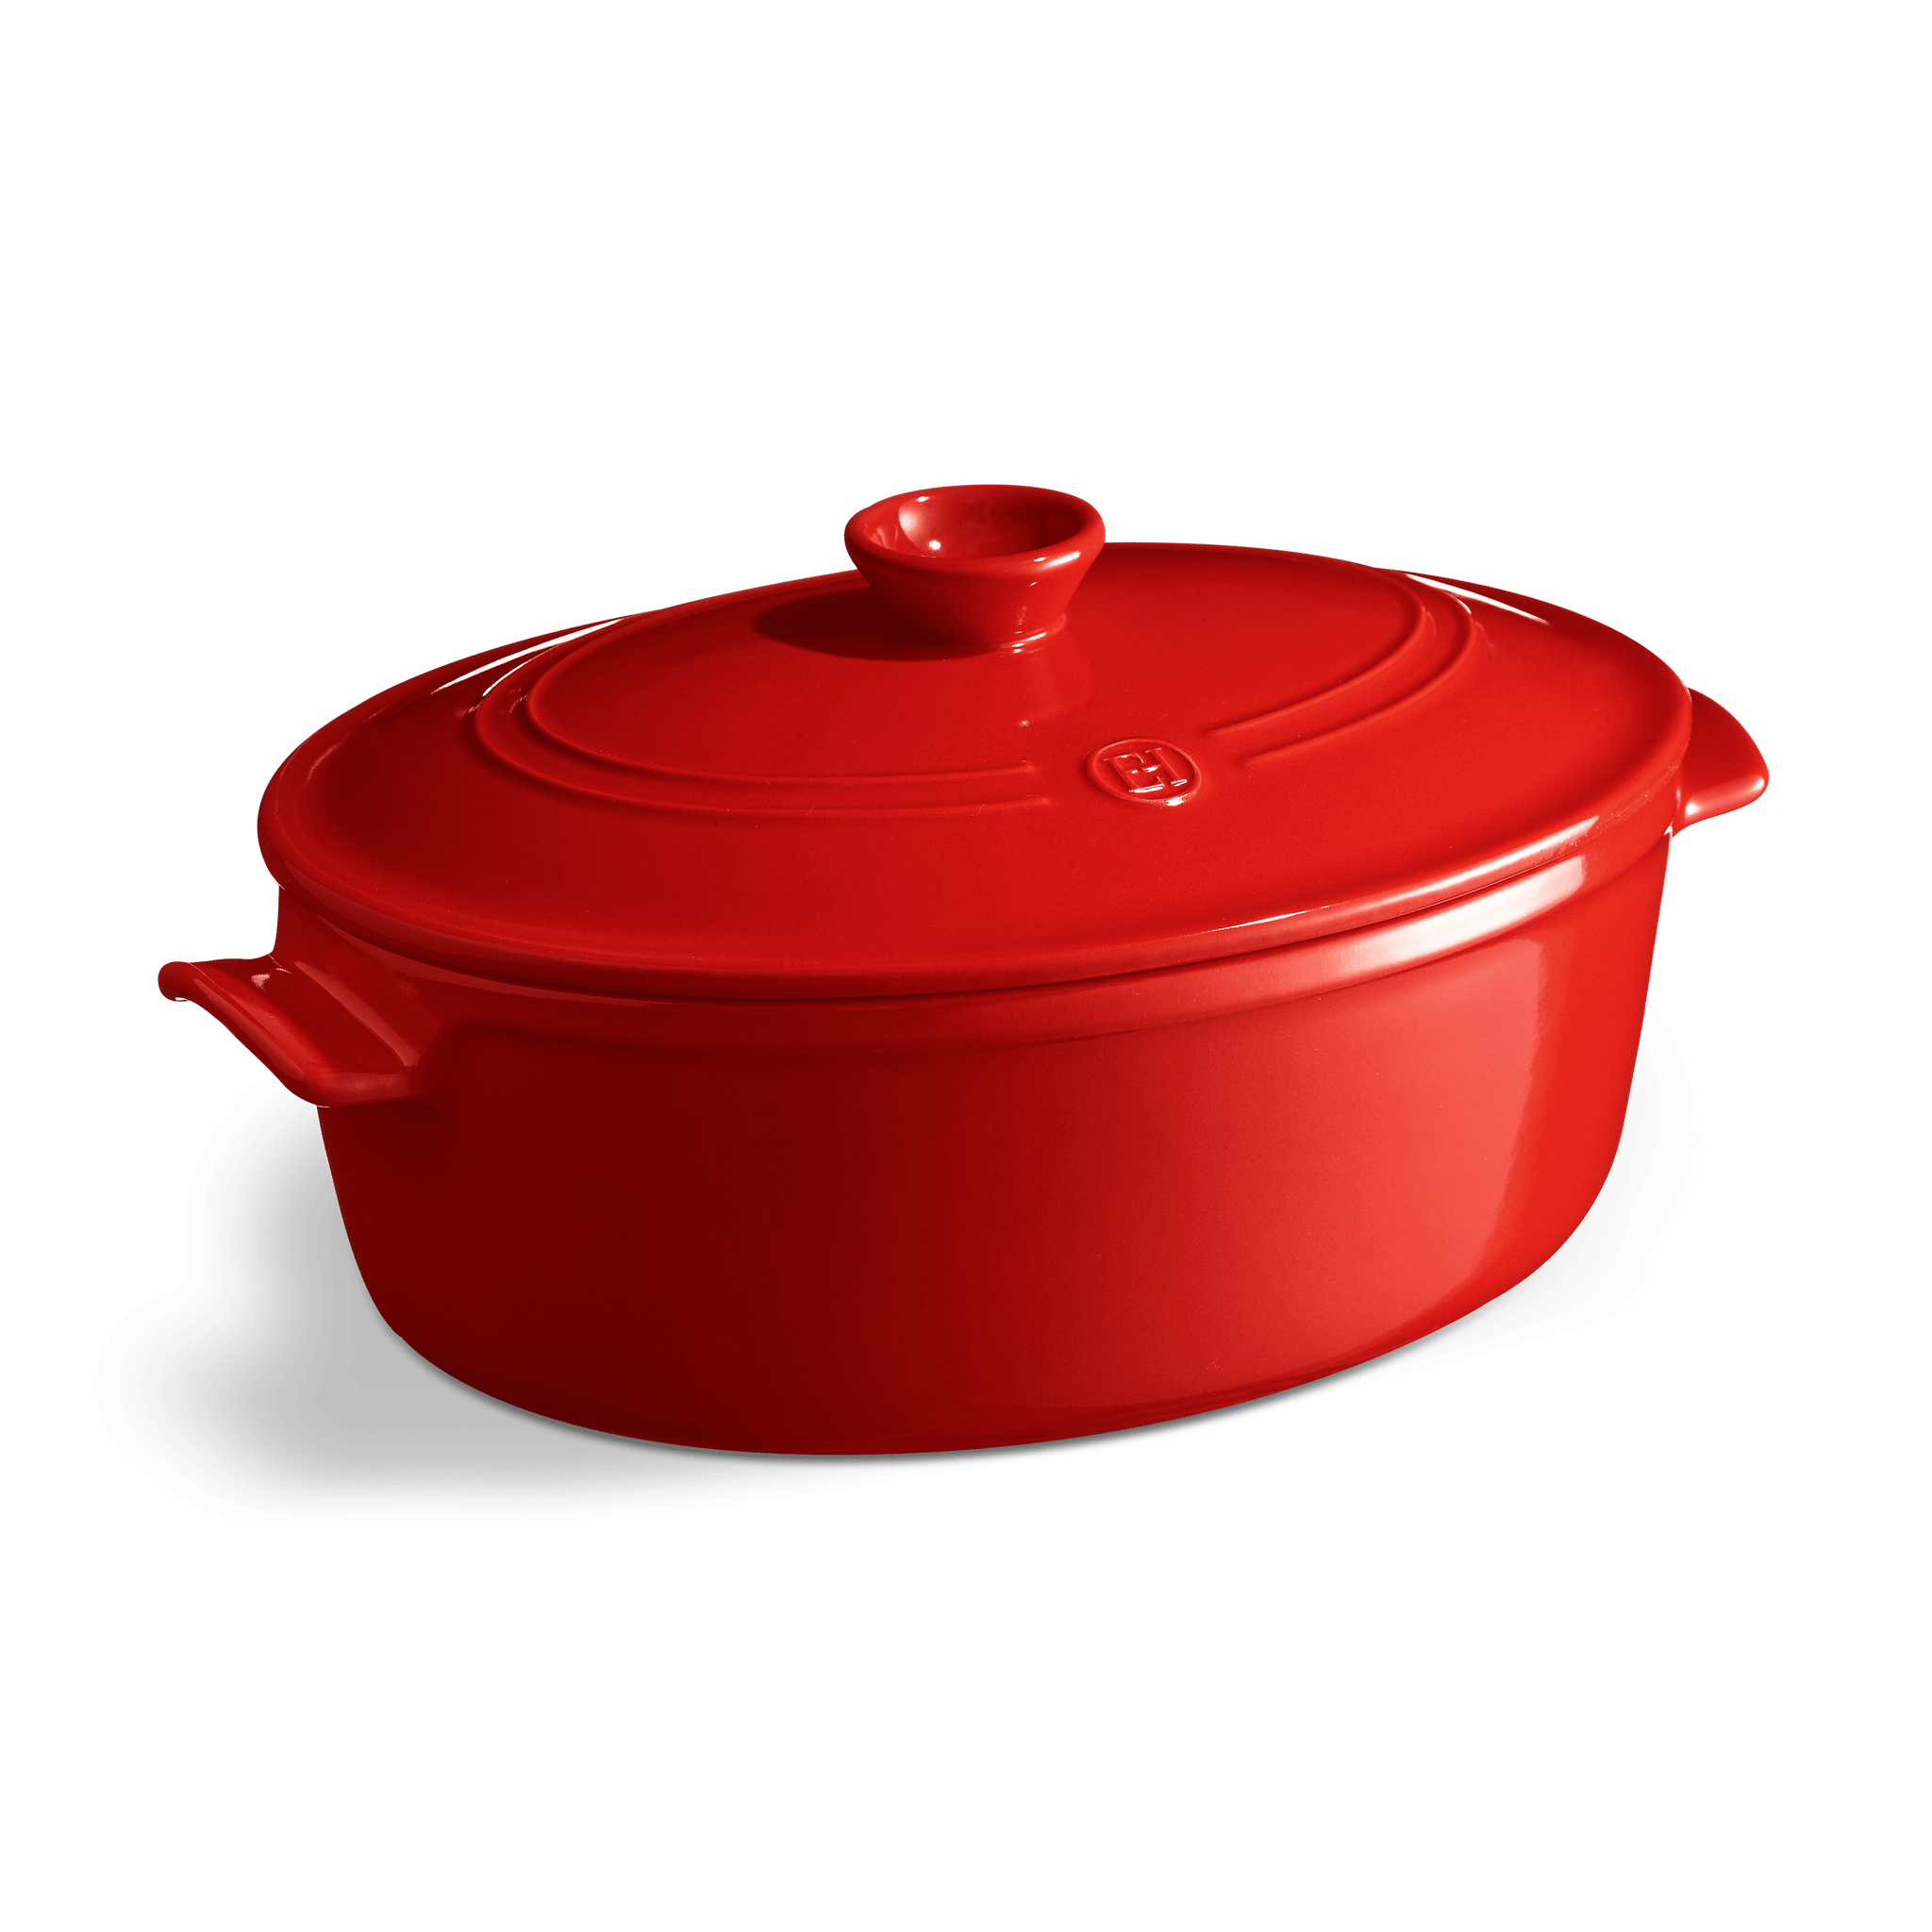 Emile Henry Flame 6.3 Quart Oval Dutch Oven/Stewpot 